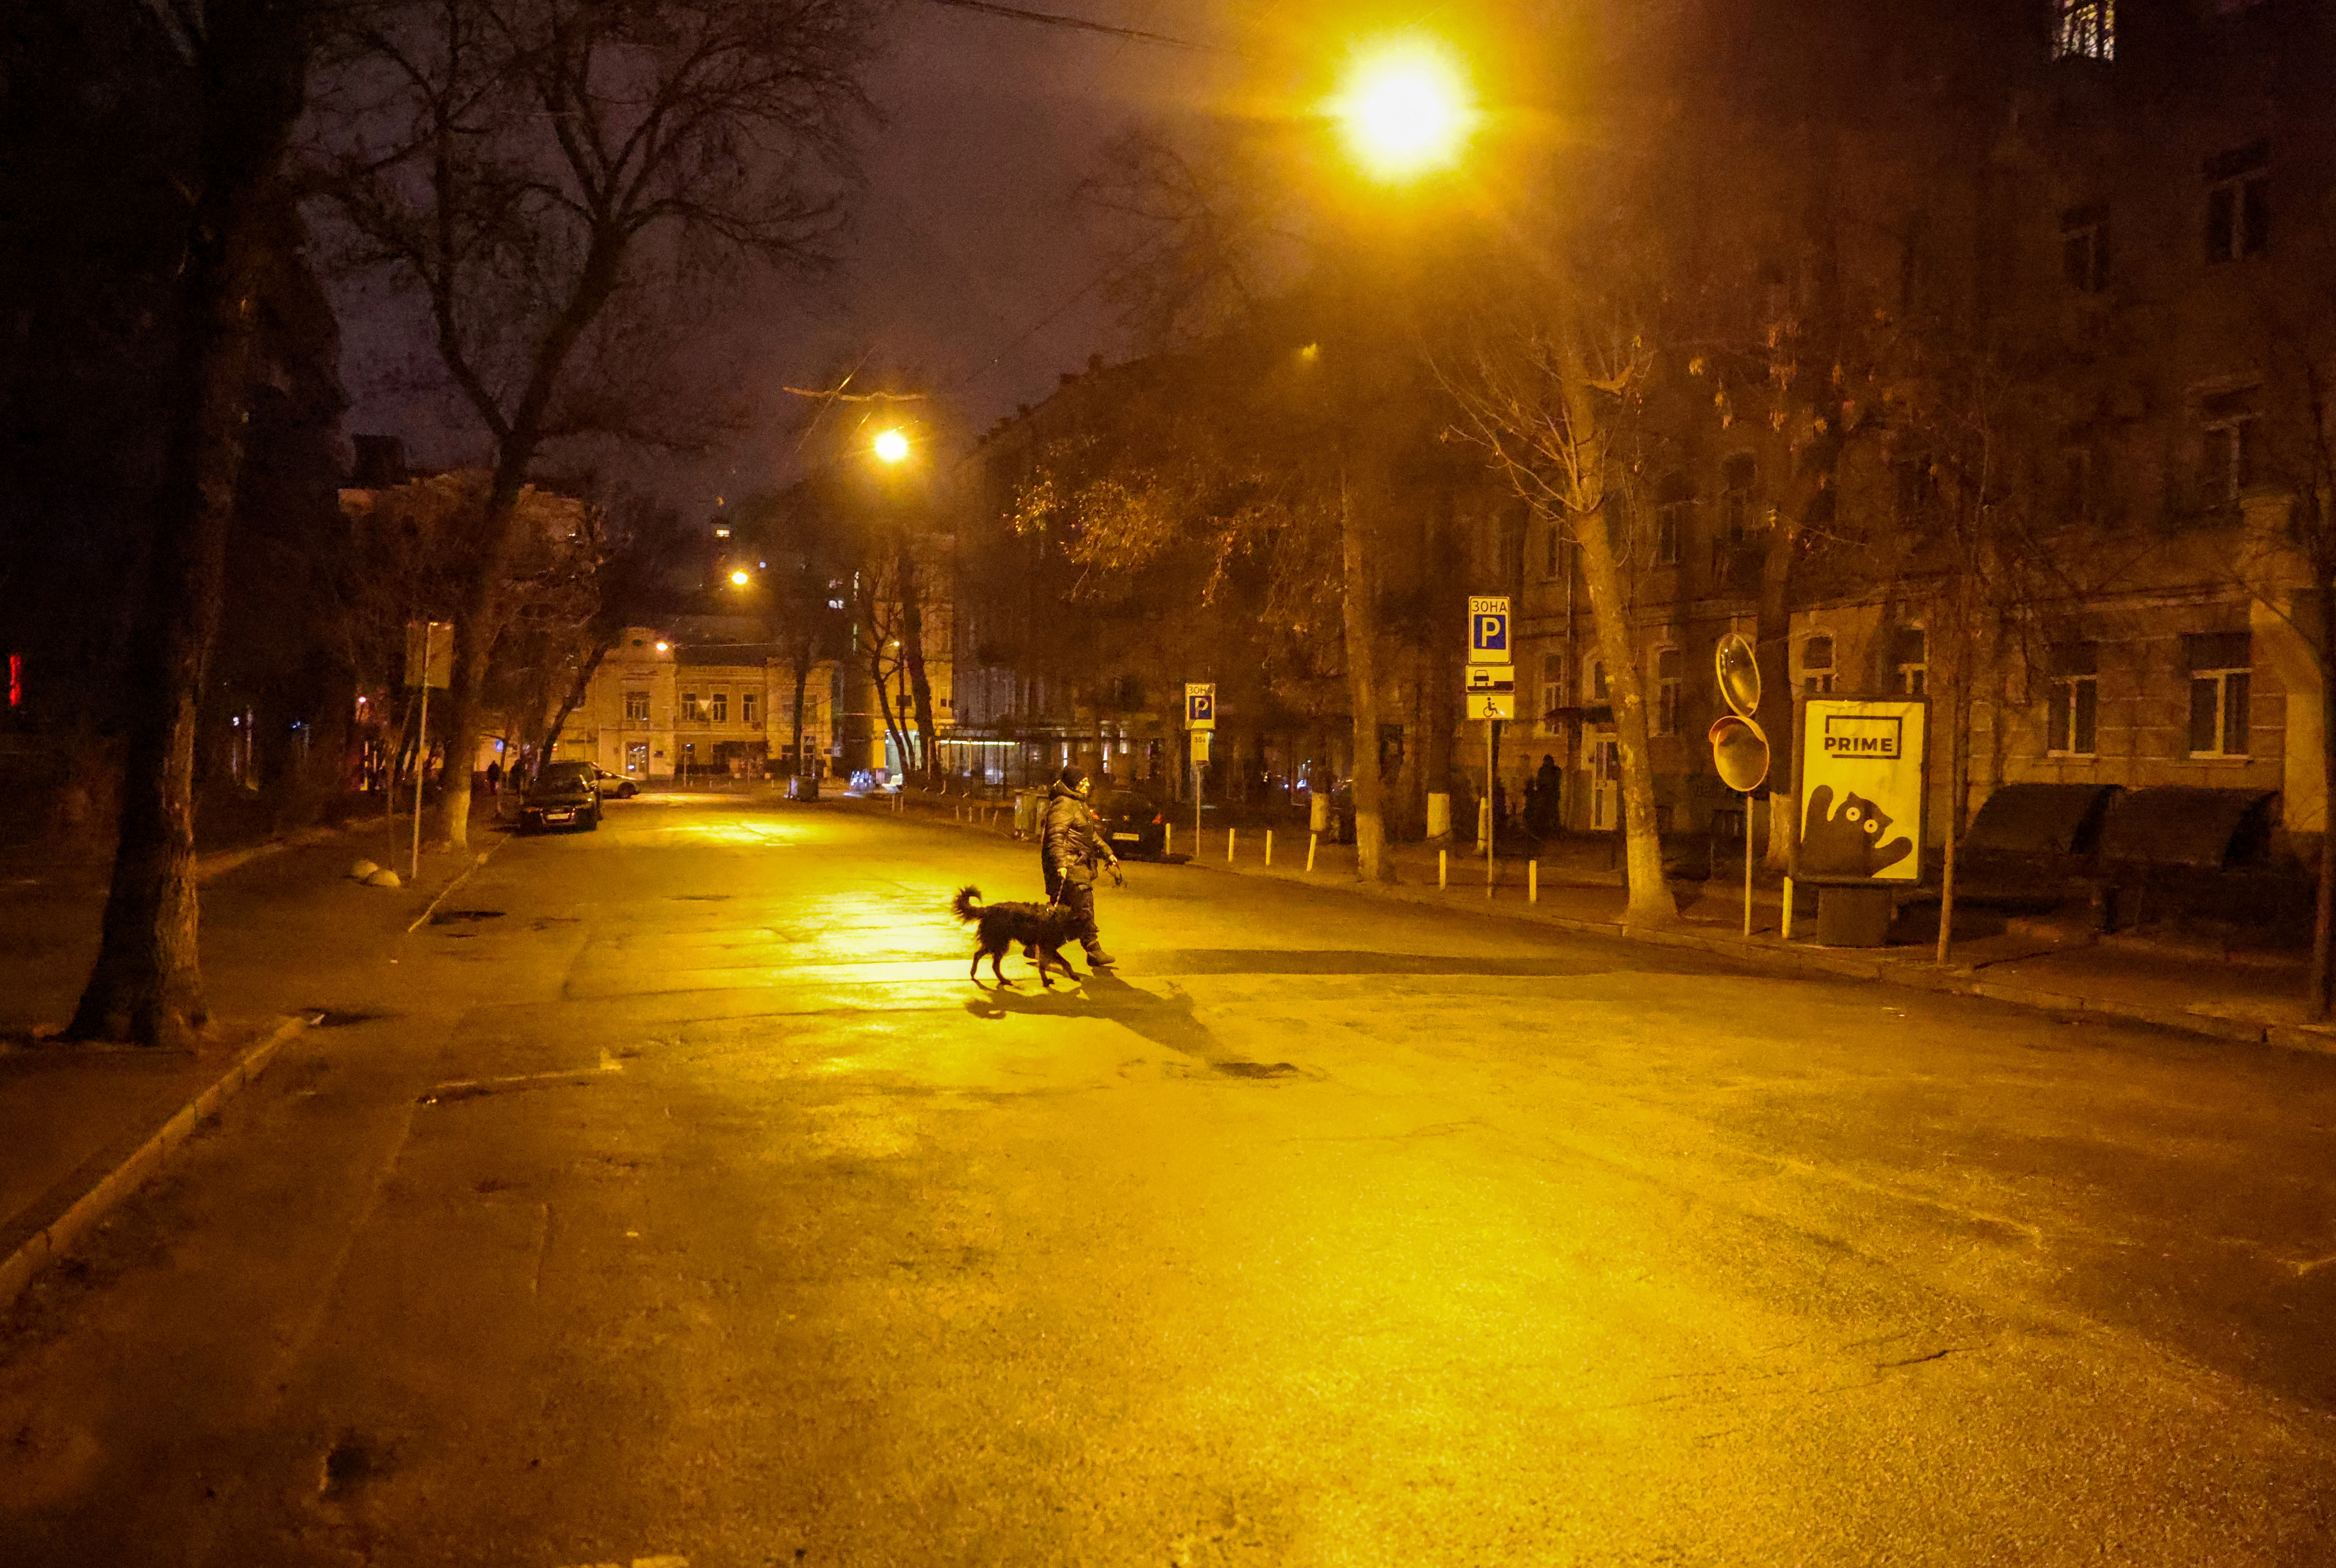 A woman walks along a deserted street with her dog a few hours before the curfew in Kyiv